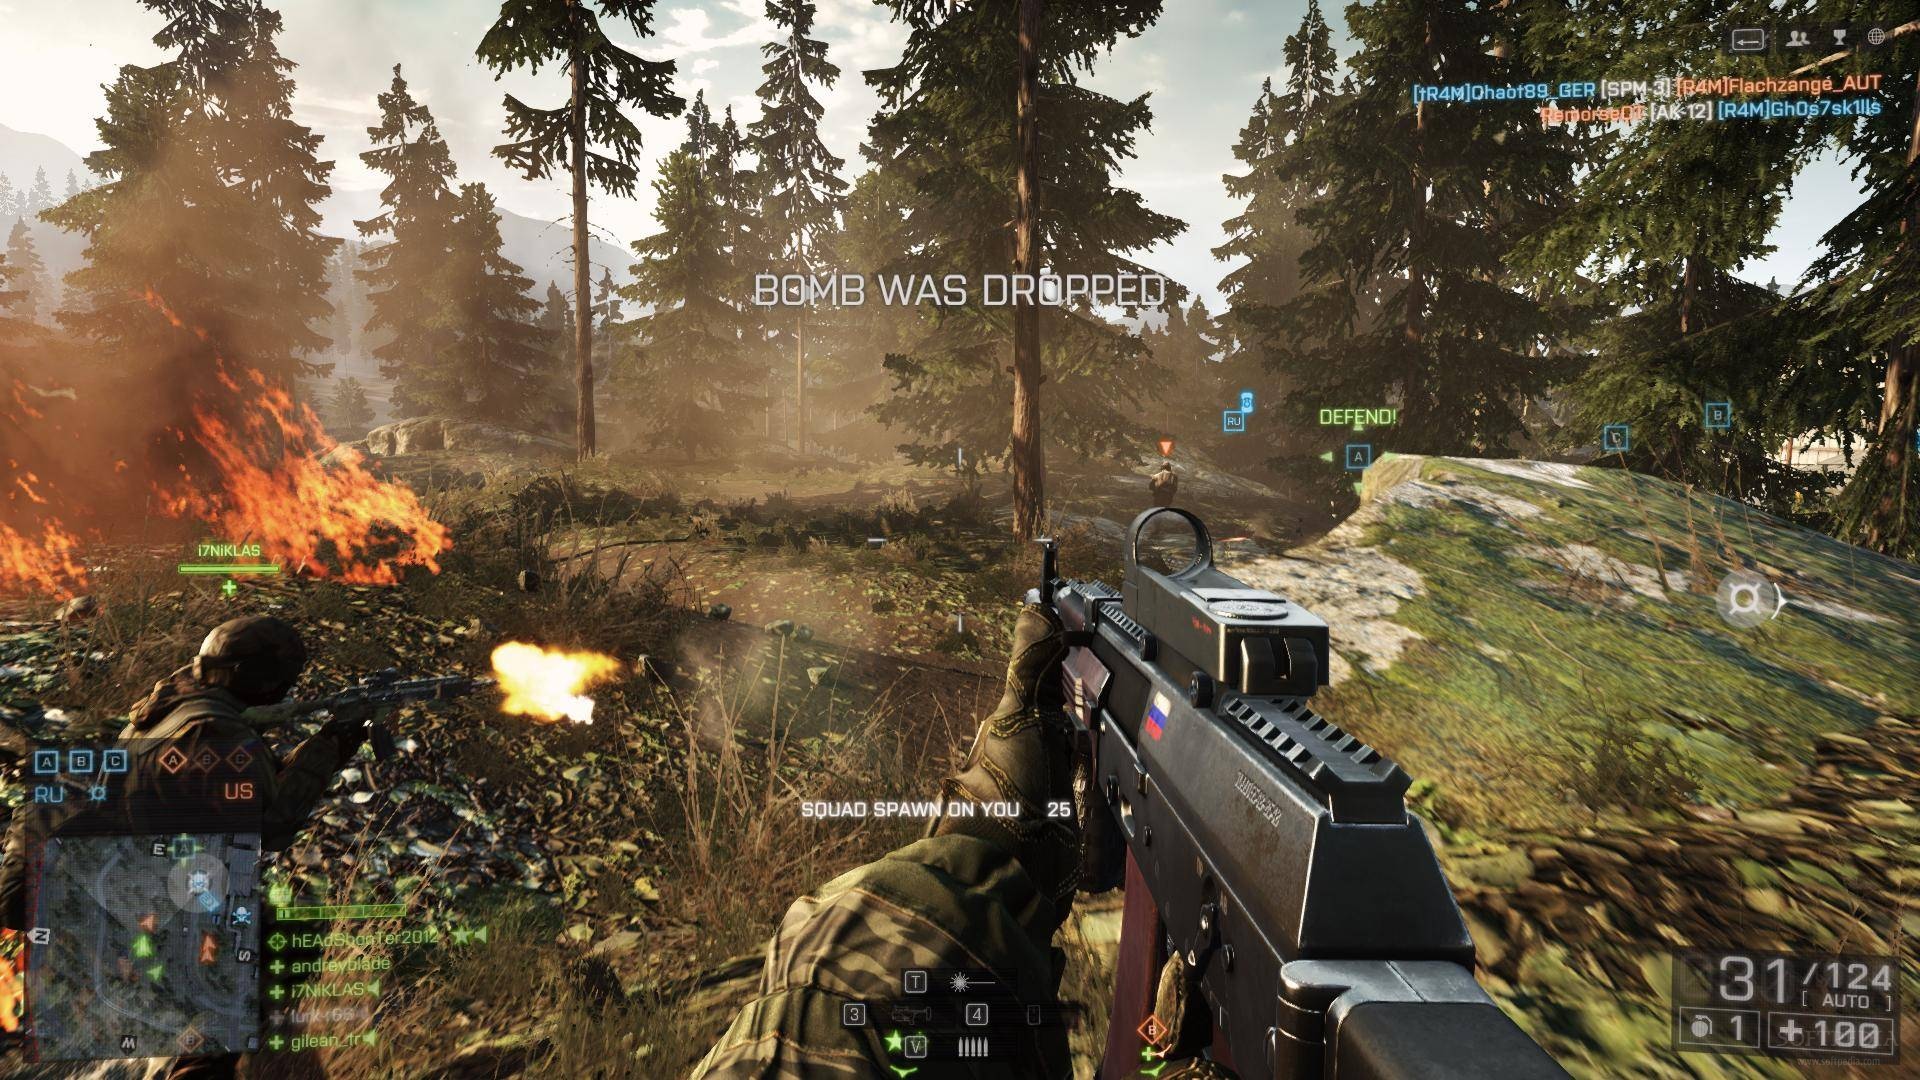 Are there still Battlefield 4 servers?